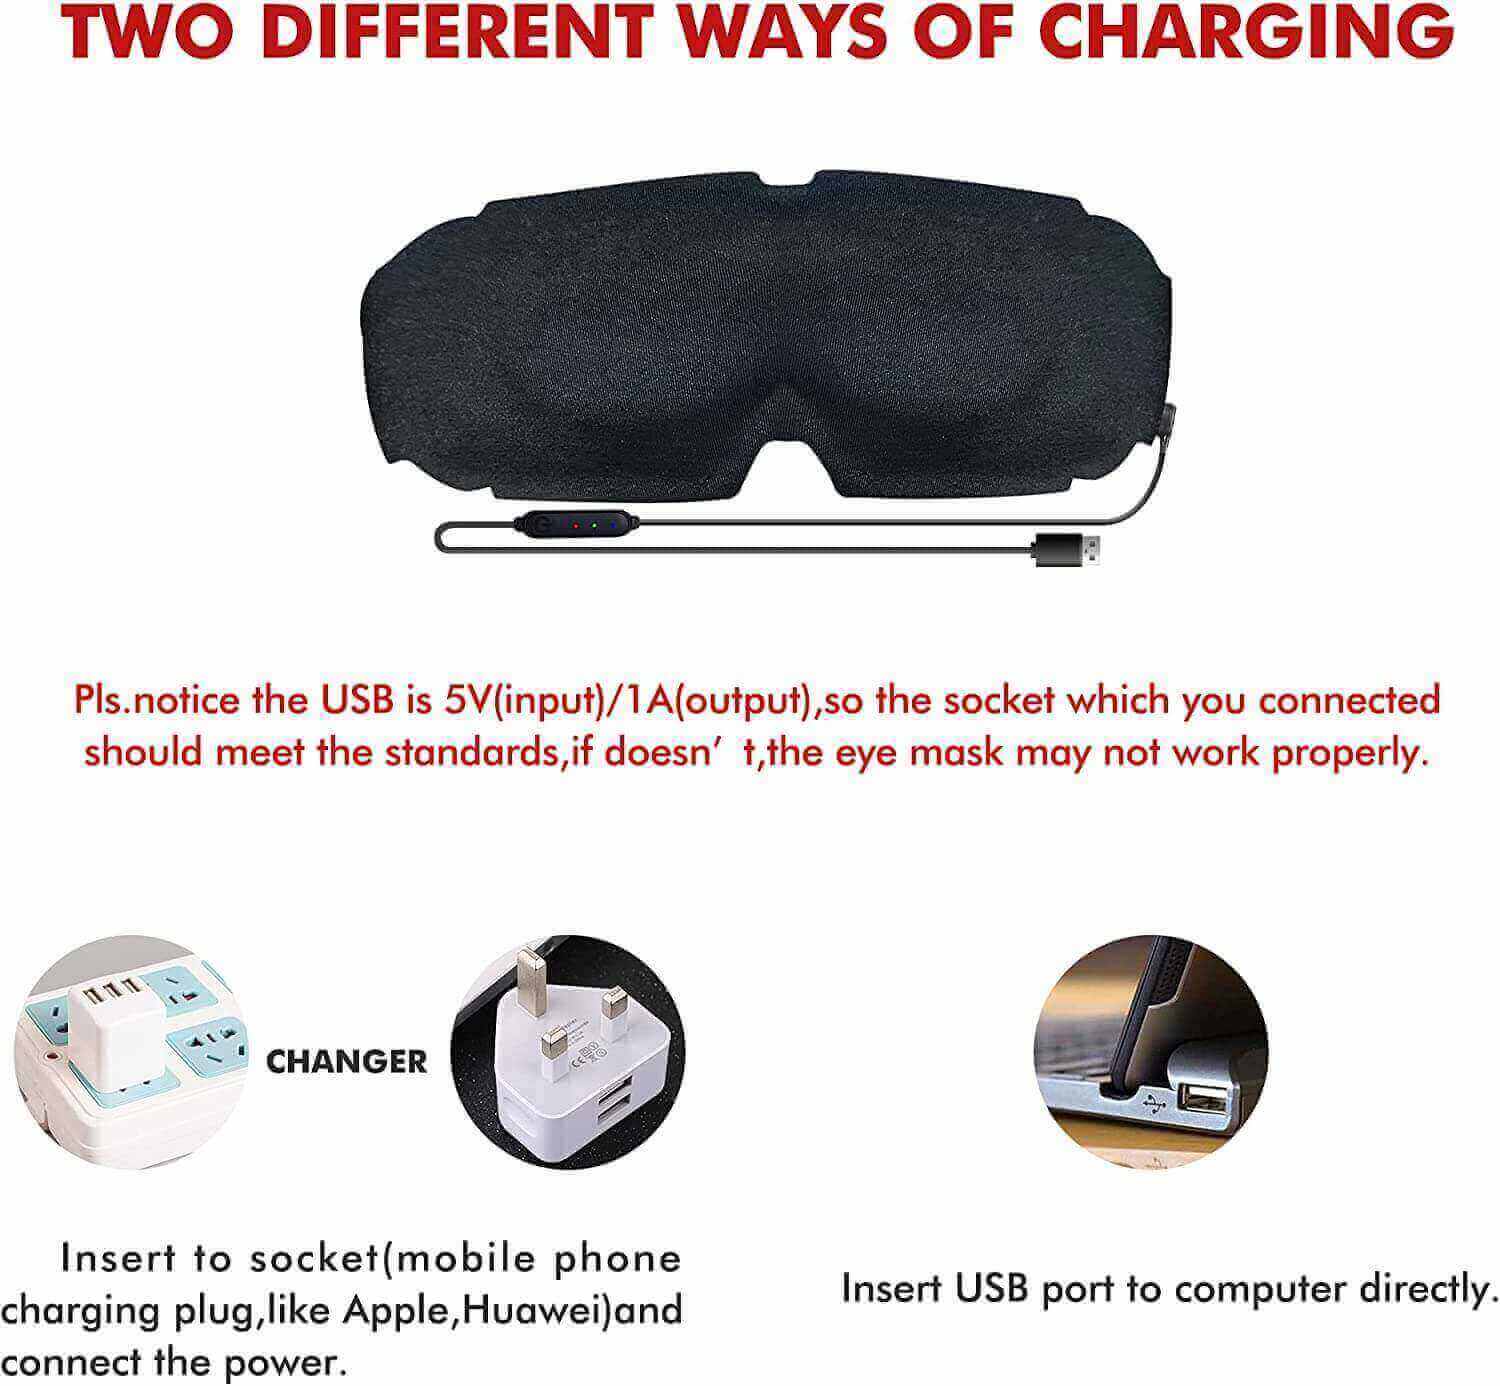 Electric heated dry eye mask, charge methods